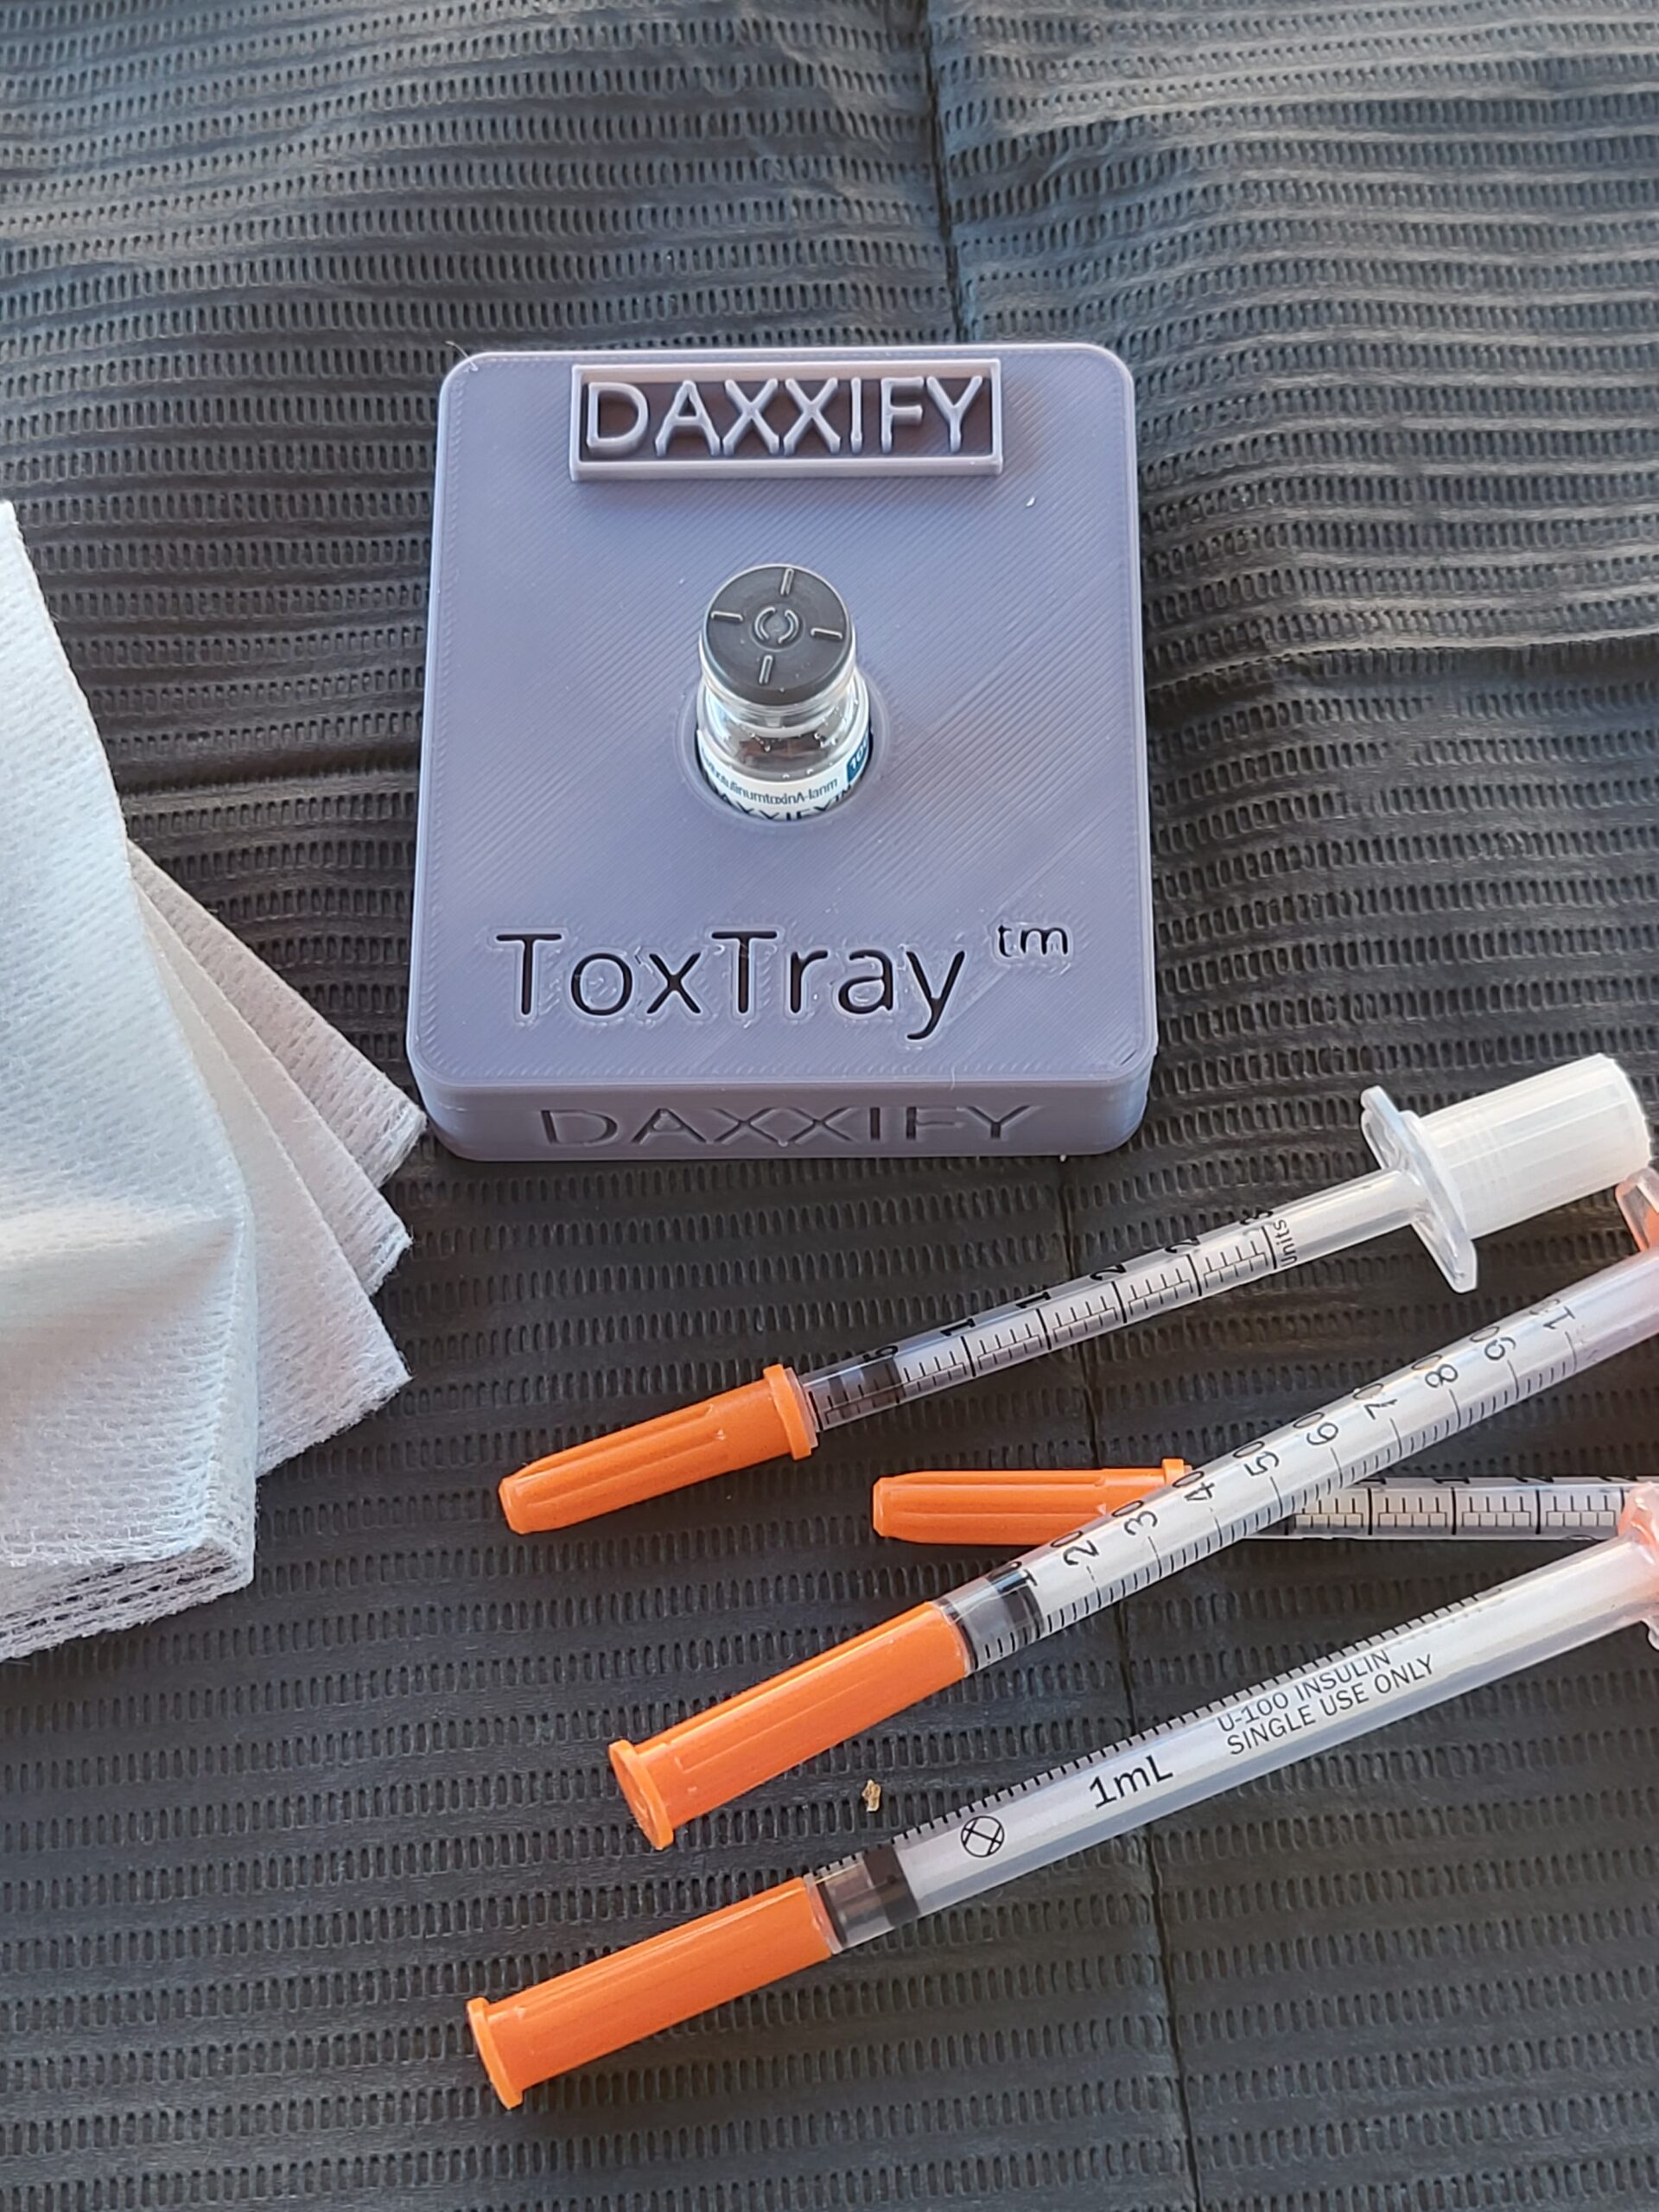 Botox Spill Reducing ToxTray for Daxxify